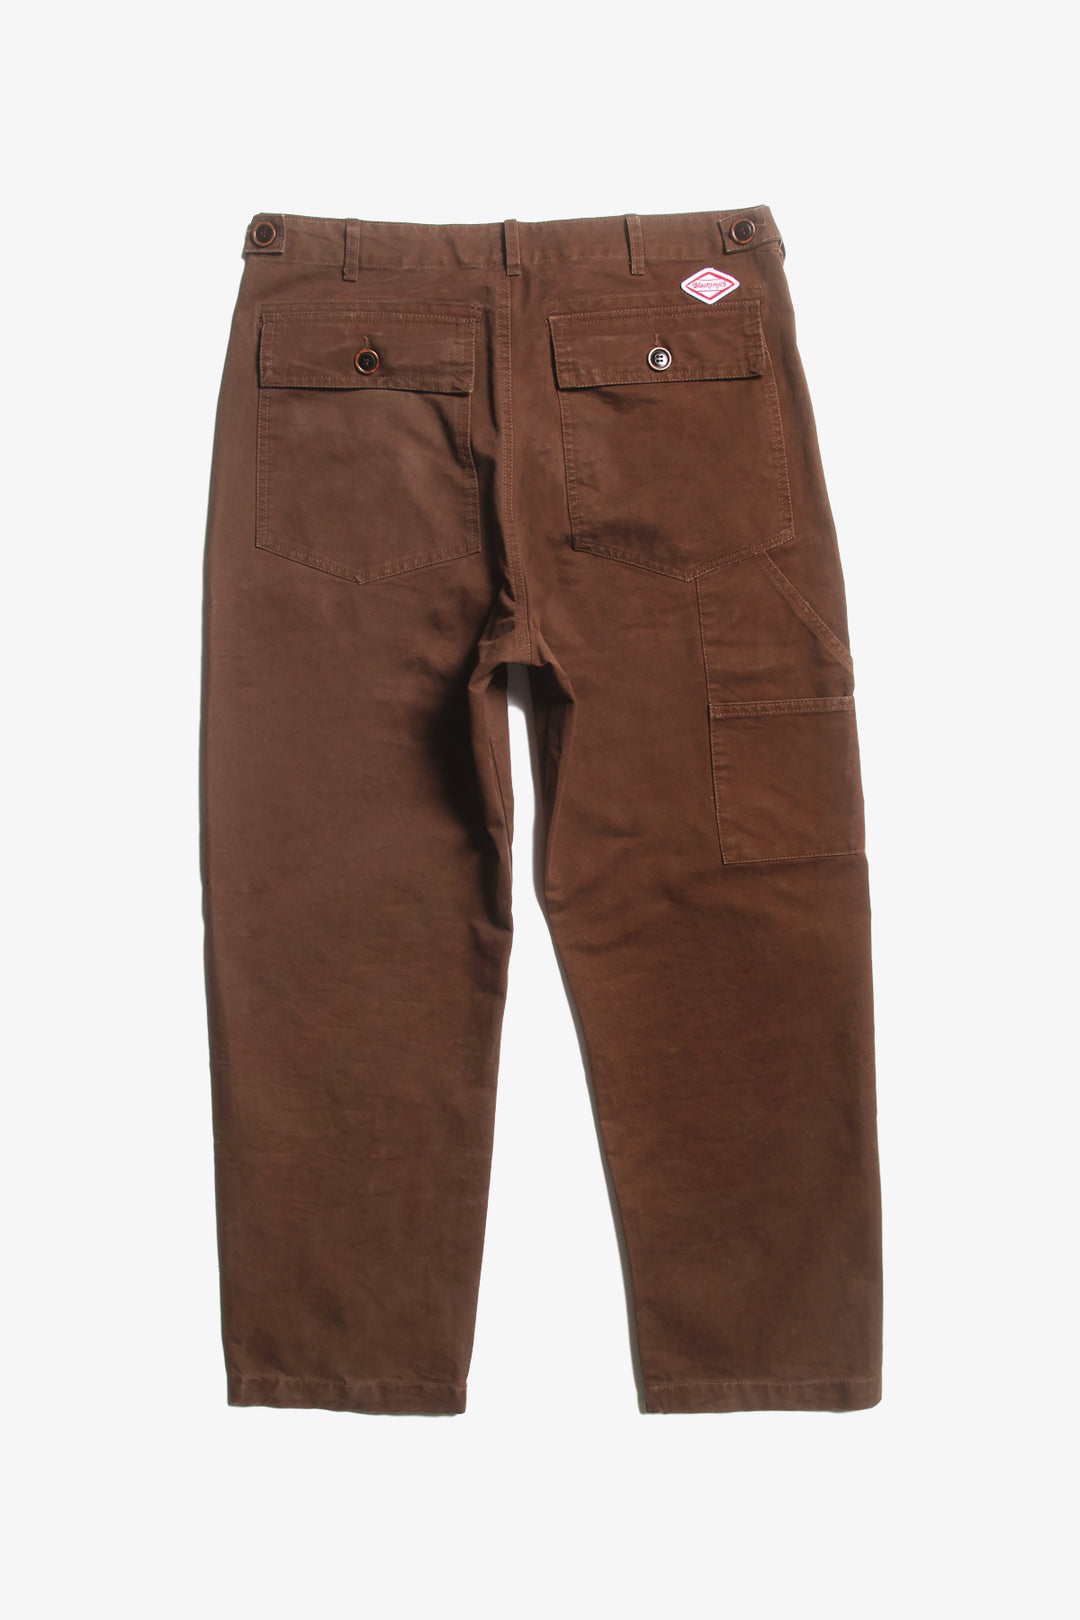 Blacksmith - Sowing Field Pants - Brown